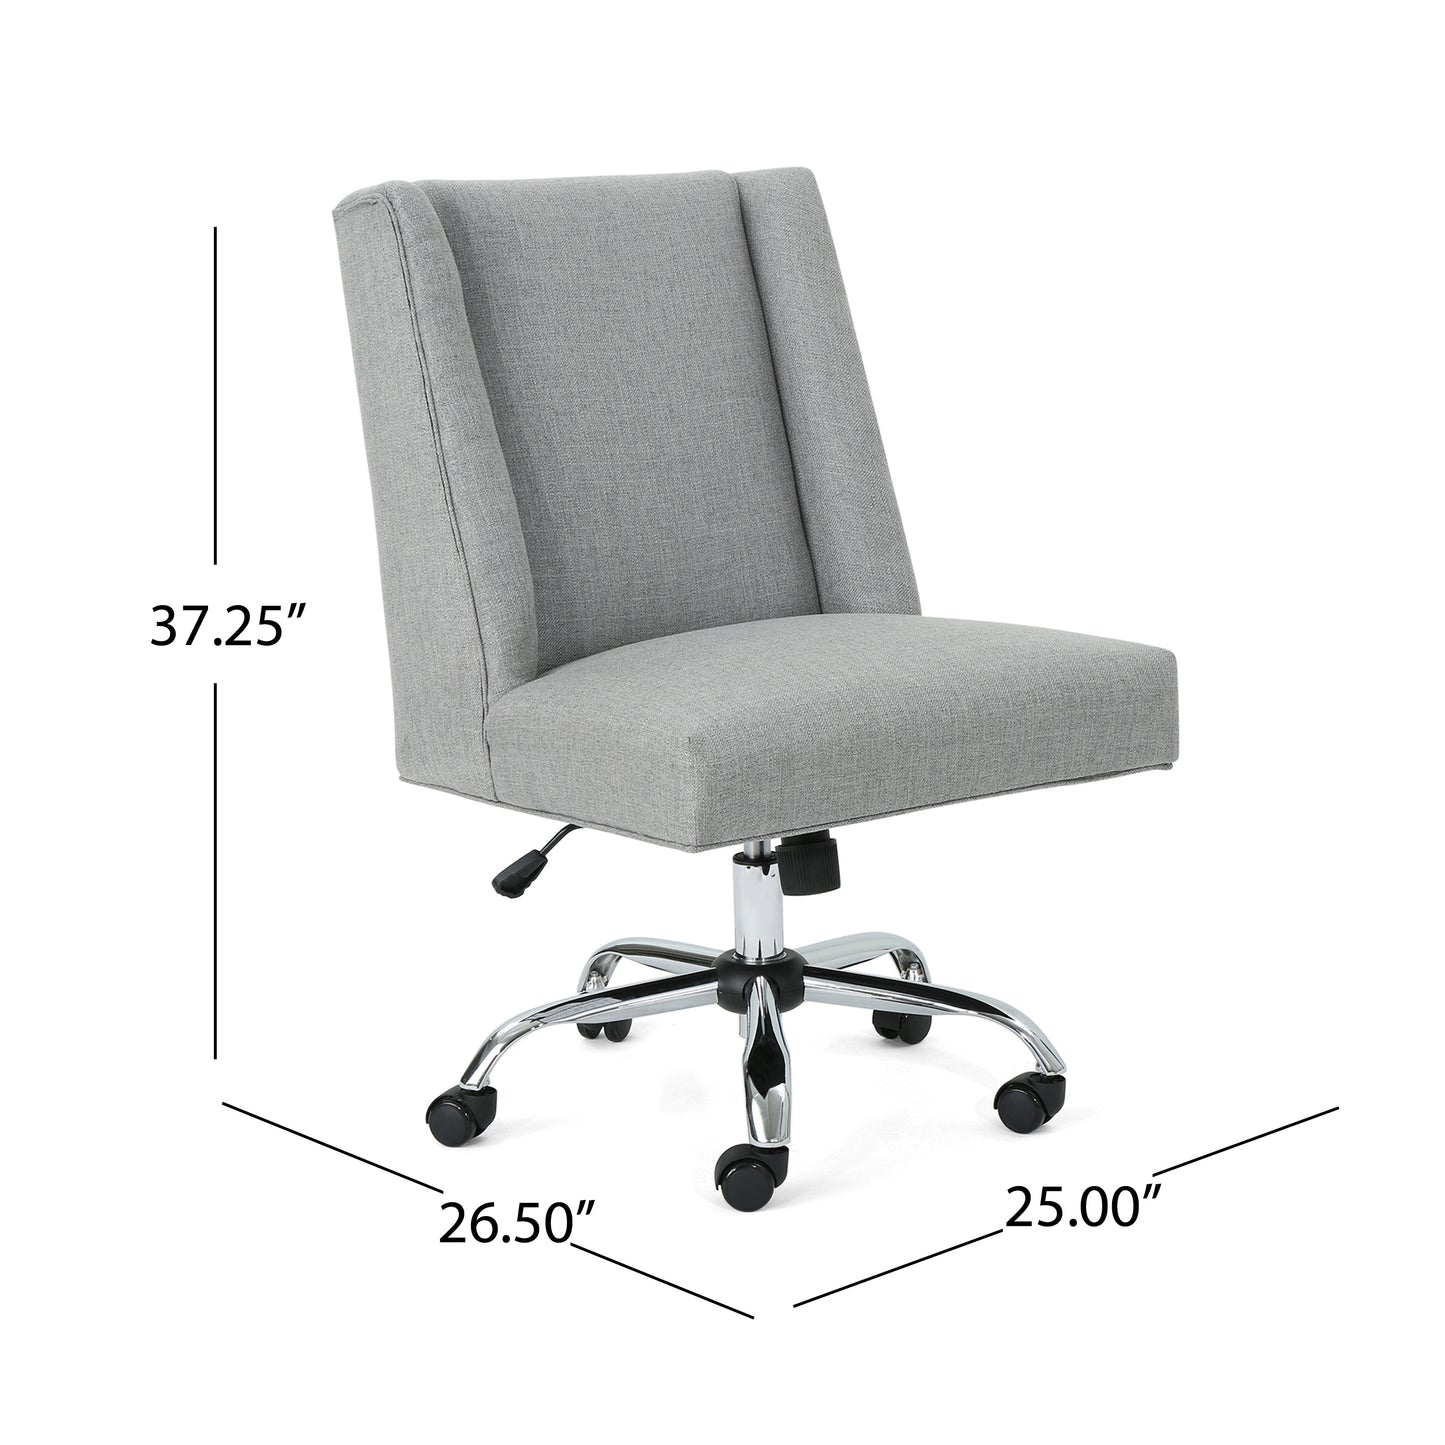 Tucker Adjustable Seat Height Home Office Chair w/ Casters